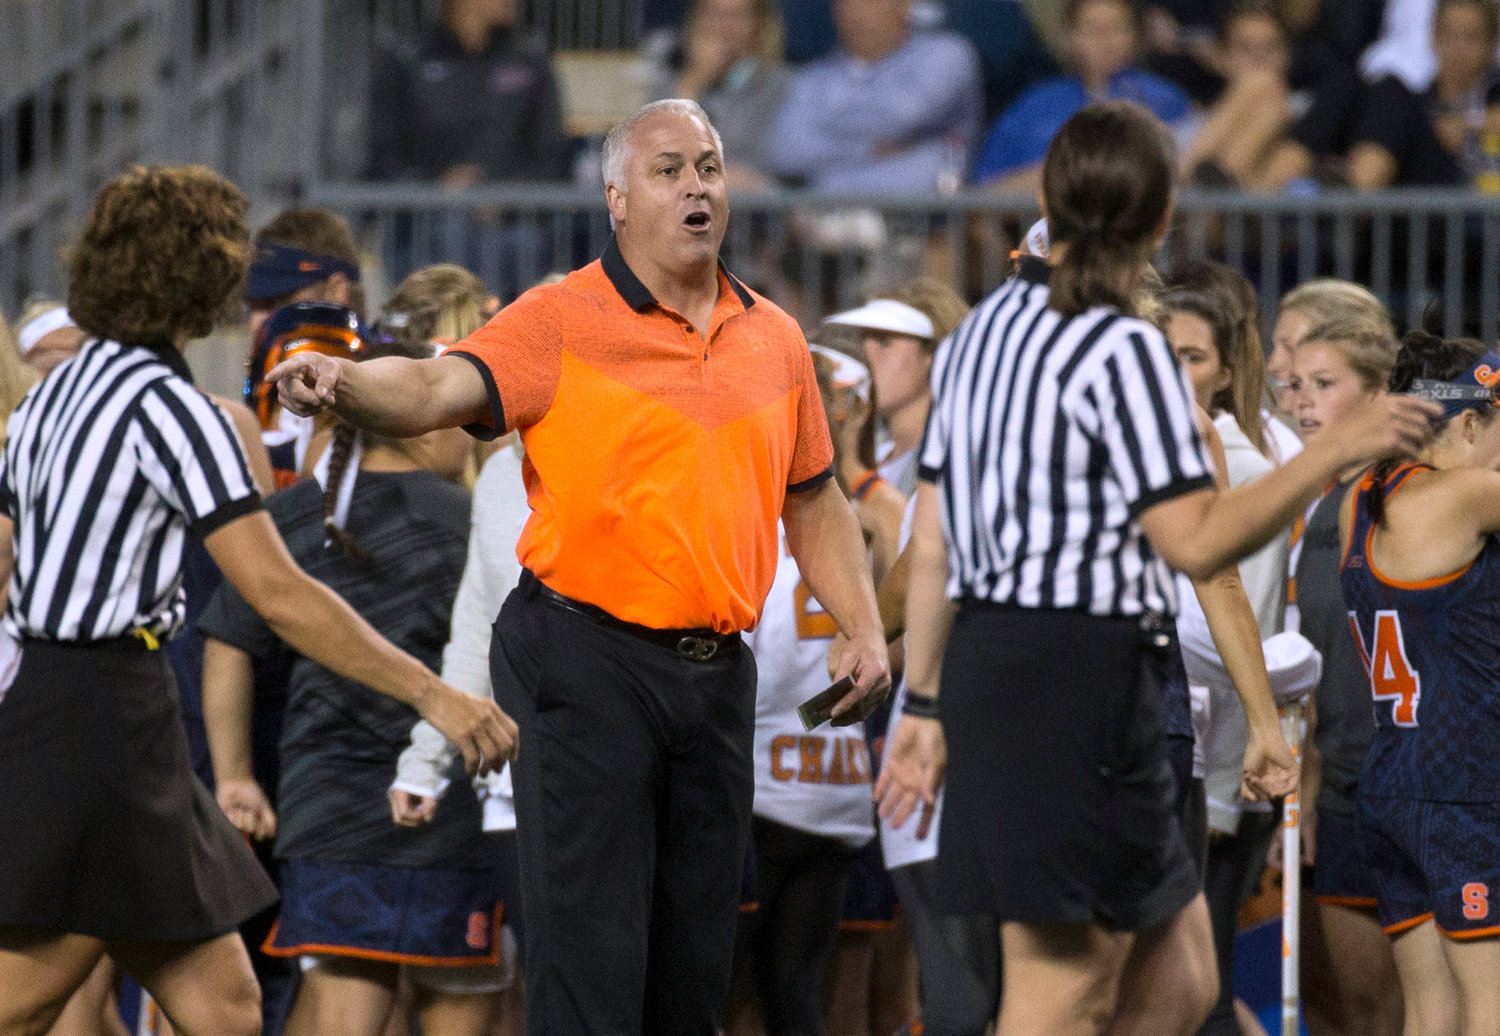 TAKING WITH OFFICIALS — Gary Gait, center, at the time Syracuse women’s lacrosse coach, talks with officials during the first half of a semifinal in the NCAA Division I women’s lacrosse tournament against Maryland, May 22, 2015, in Chester, Pa. Gait’s first year as men’s lacrosse coach at Syracuse has been a challenge.